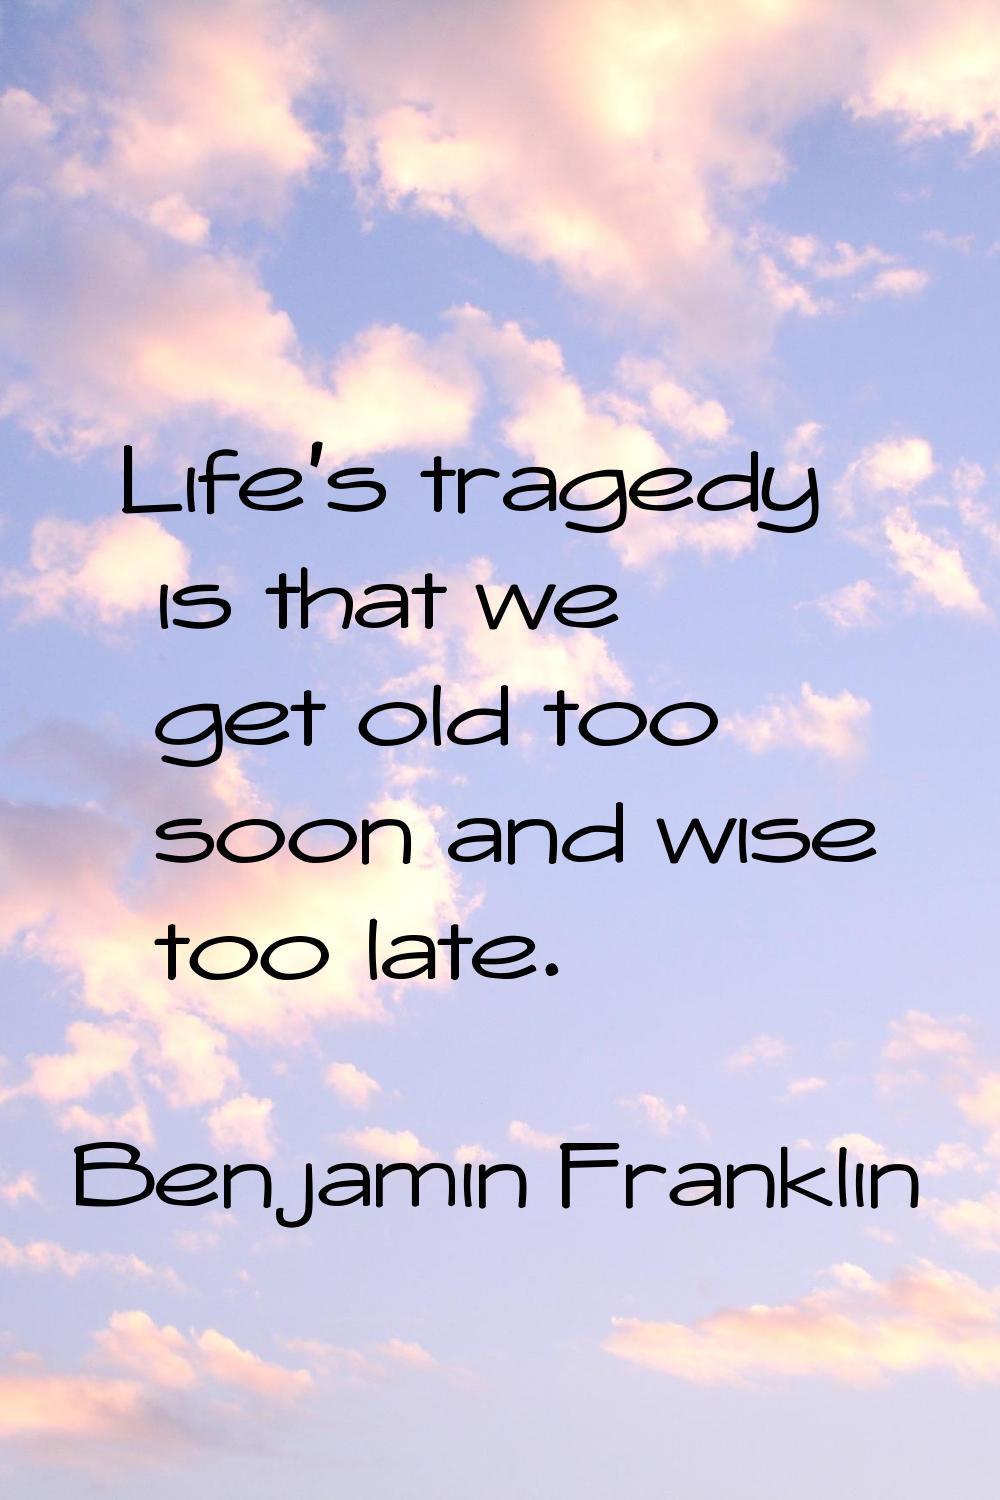 Life's tragedy is that we get old too soon and wise too late.